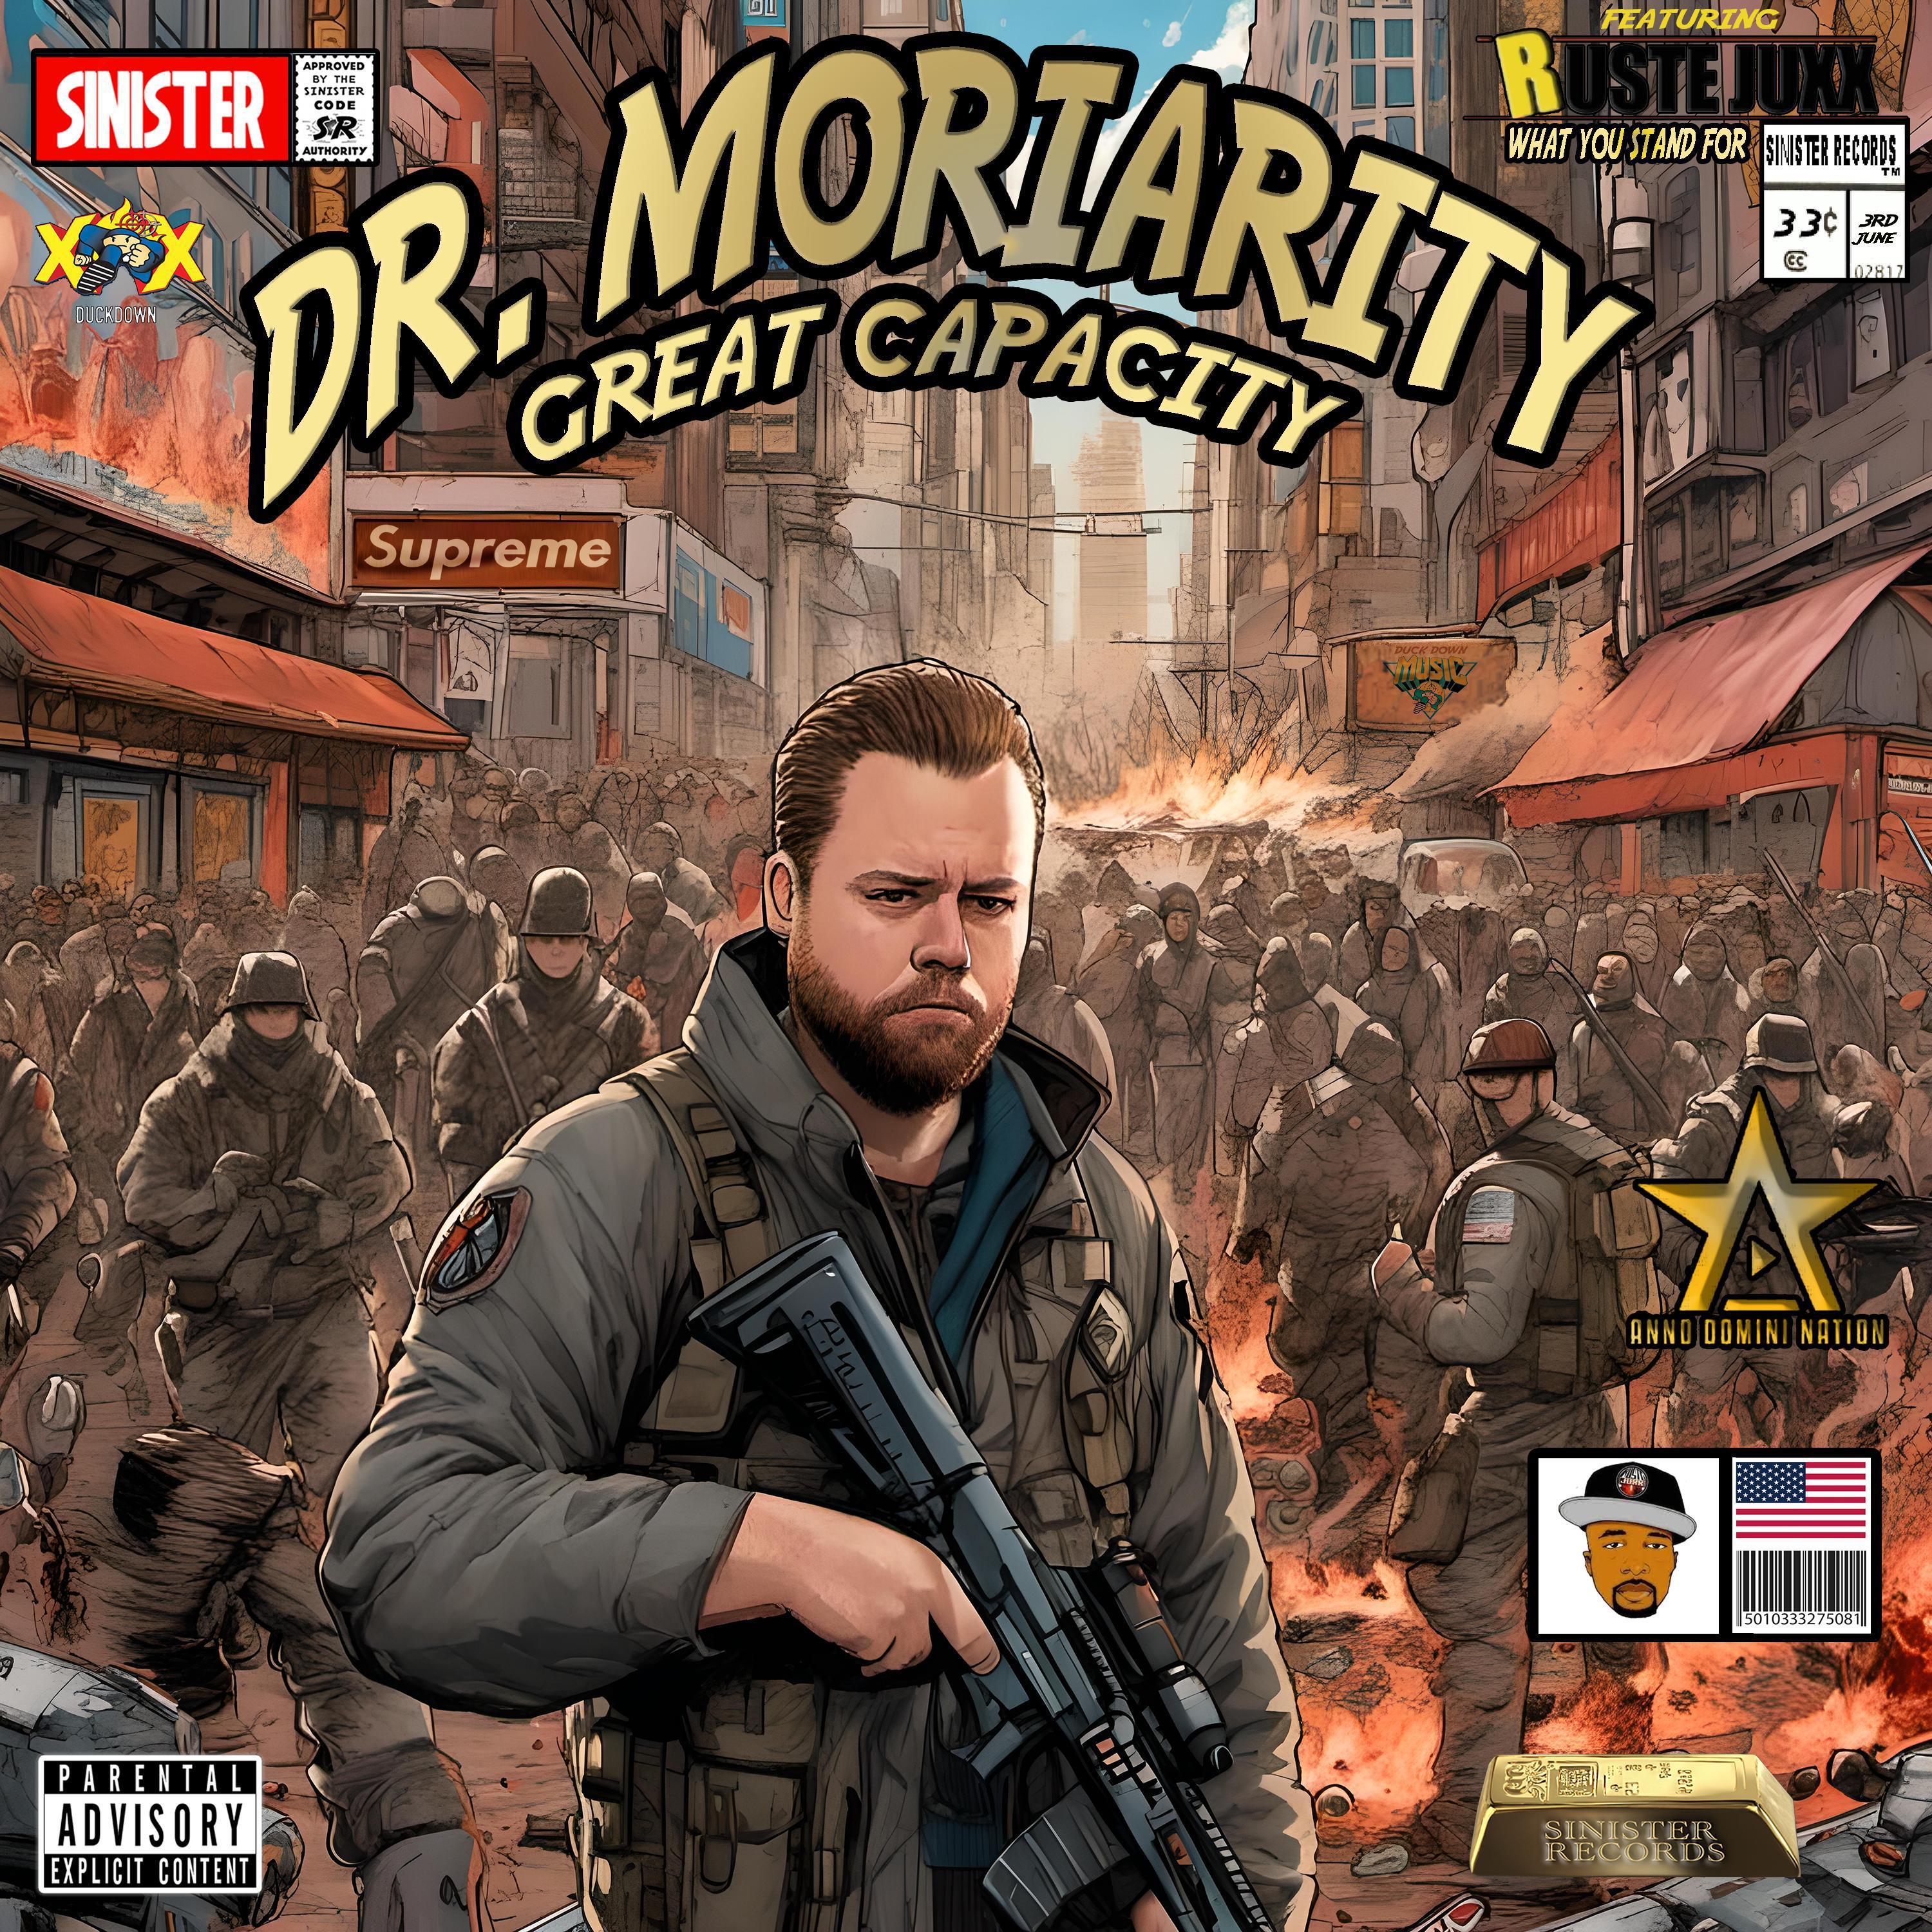 Dr. Moriarity - What you stand for (feat. Ruste Juxx & Great Capacity)